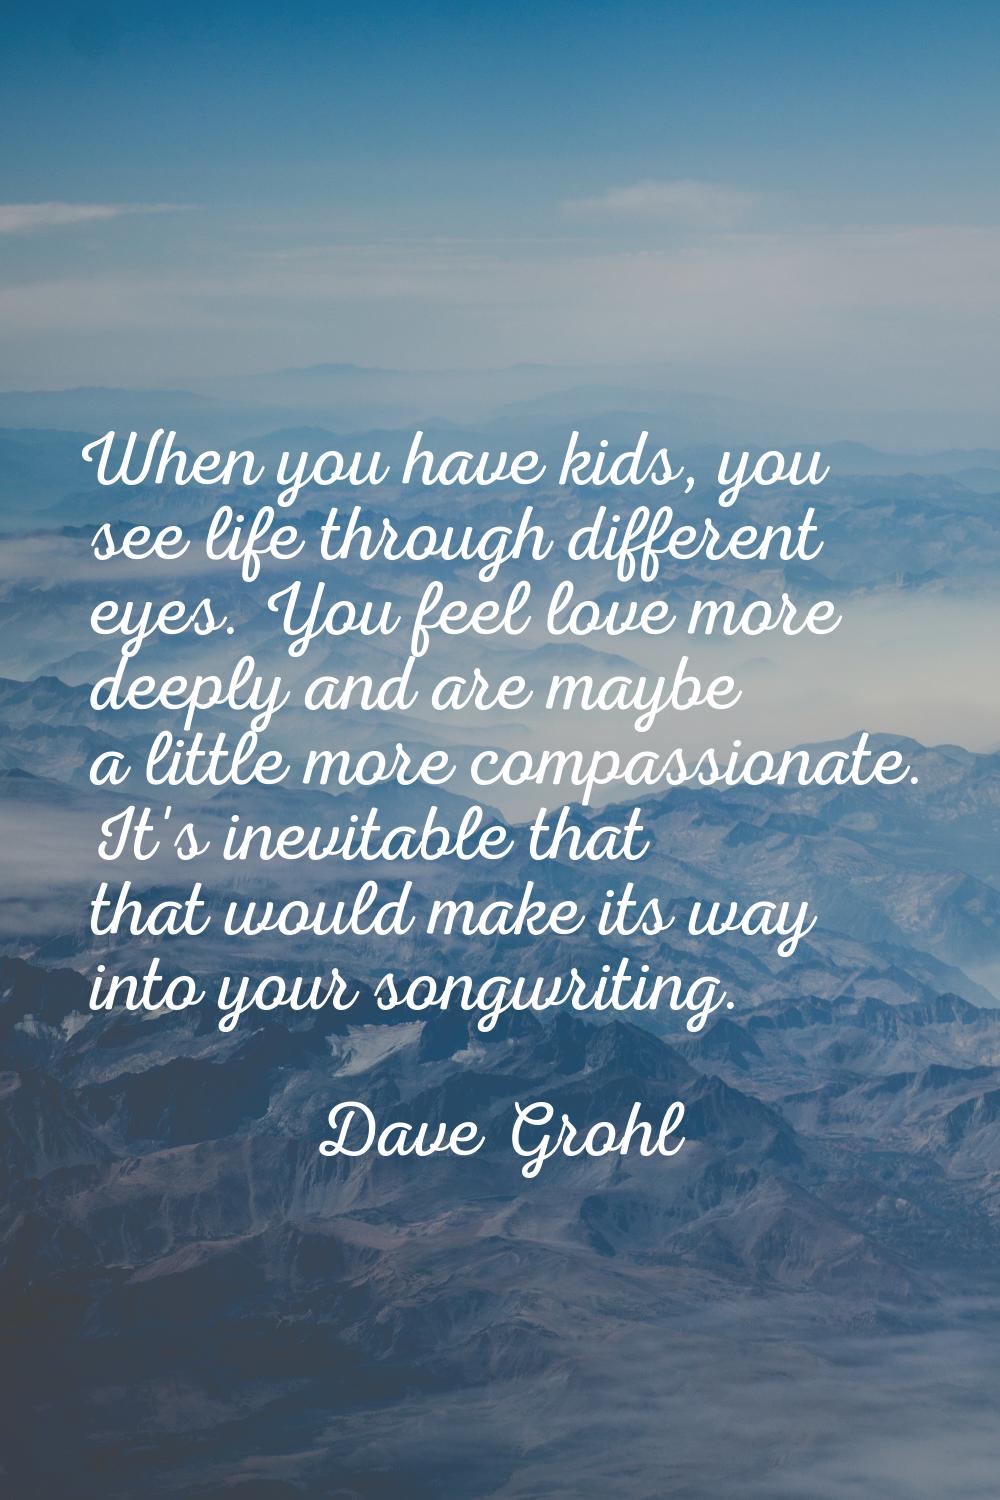 When you have kids, you see life through different eyes. You feel love more deeply and are maybe a 